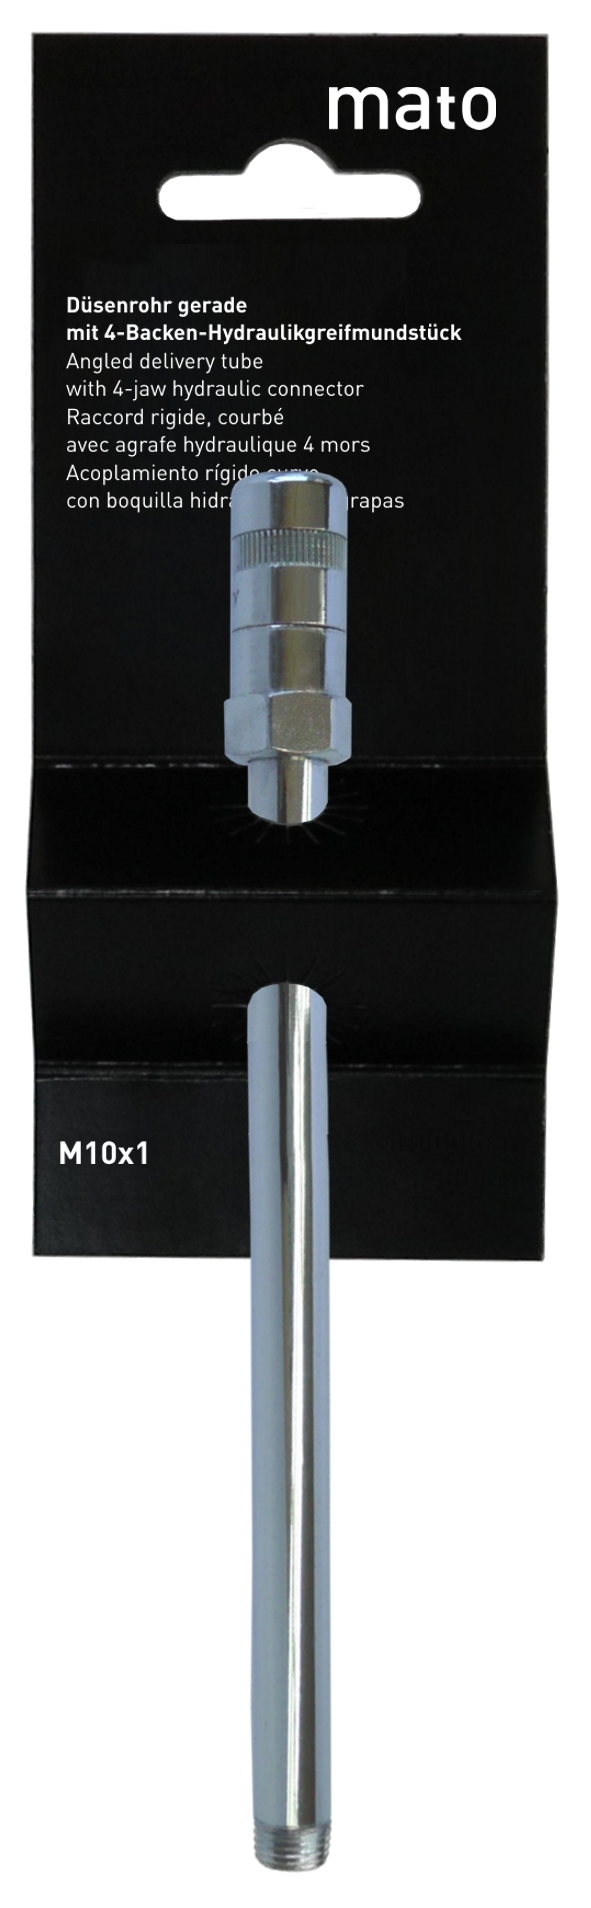 Delivery tube with 4-jaw hydraulic connector M10x1<br>PoS-design retail package, paper-headcard